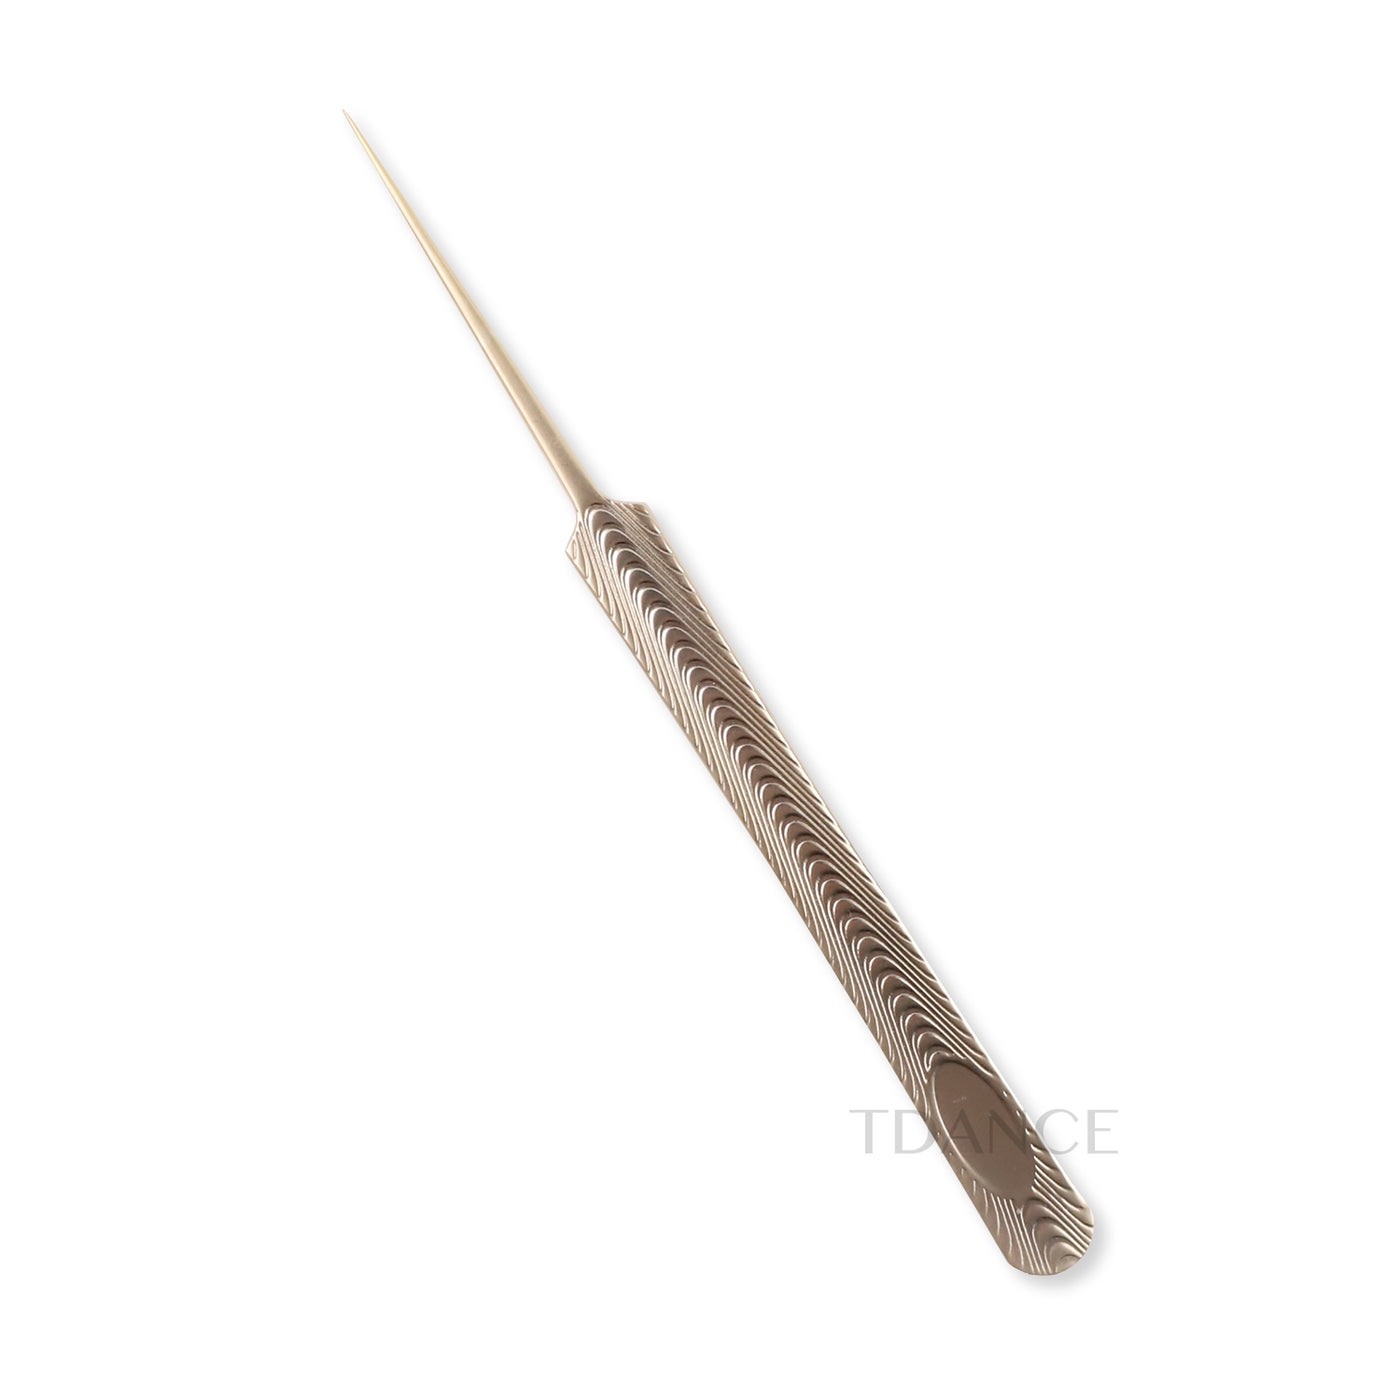 TF-09 Fish Scale Gold Tweezers For Eyelash Extension